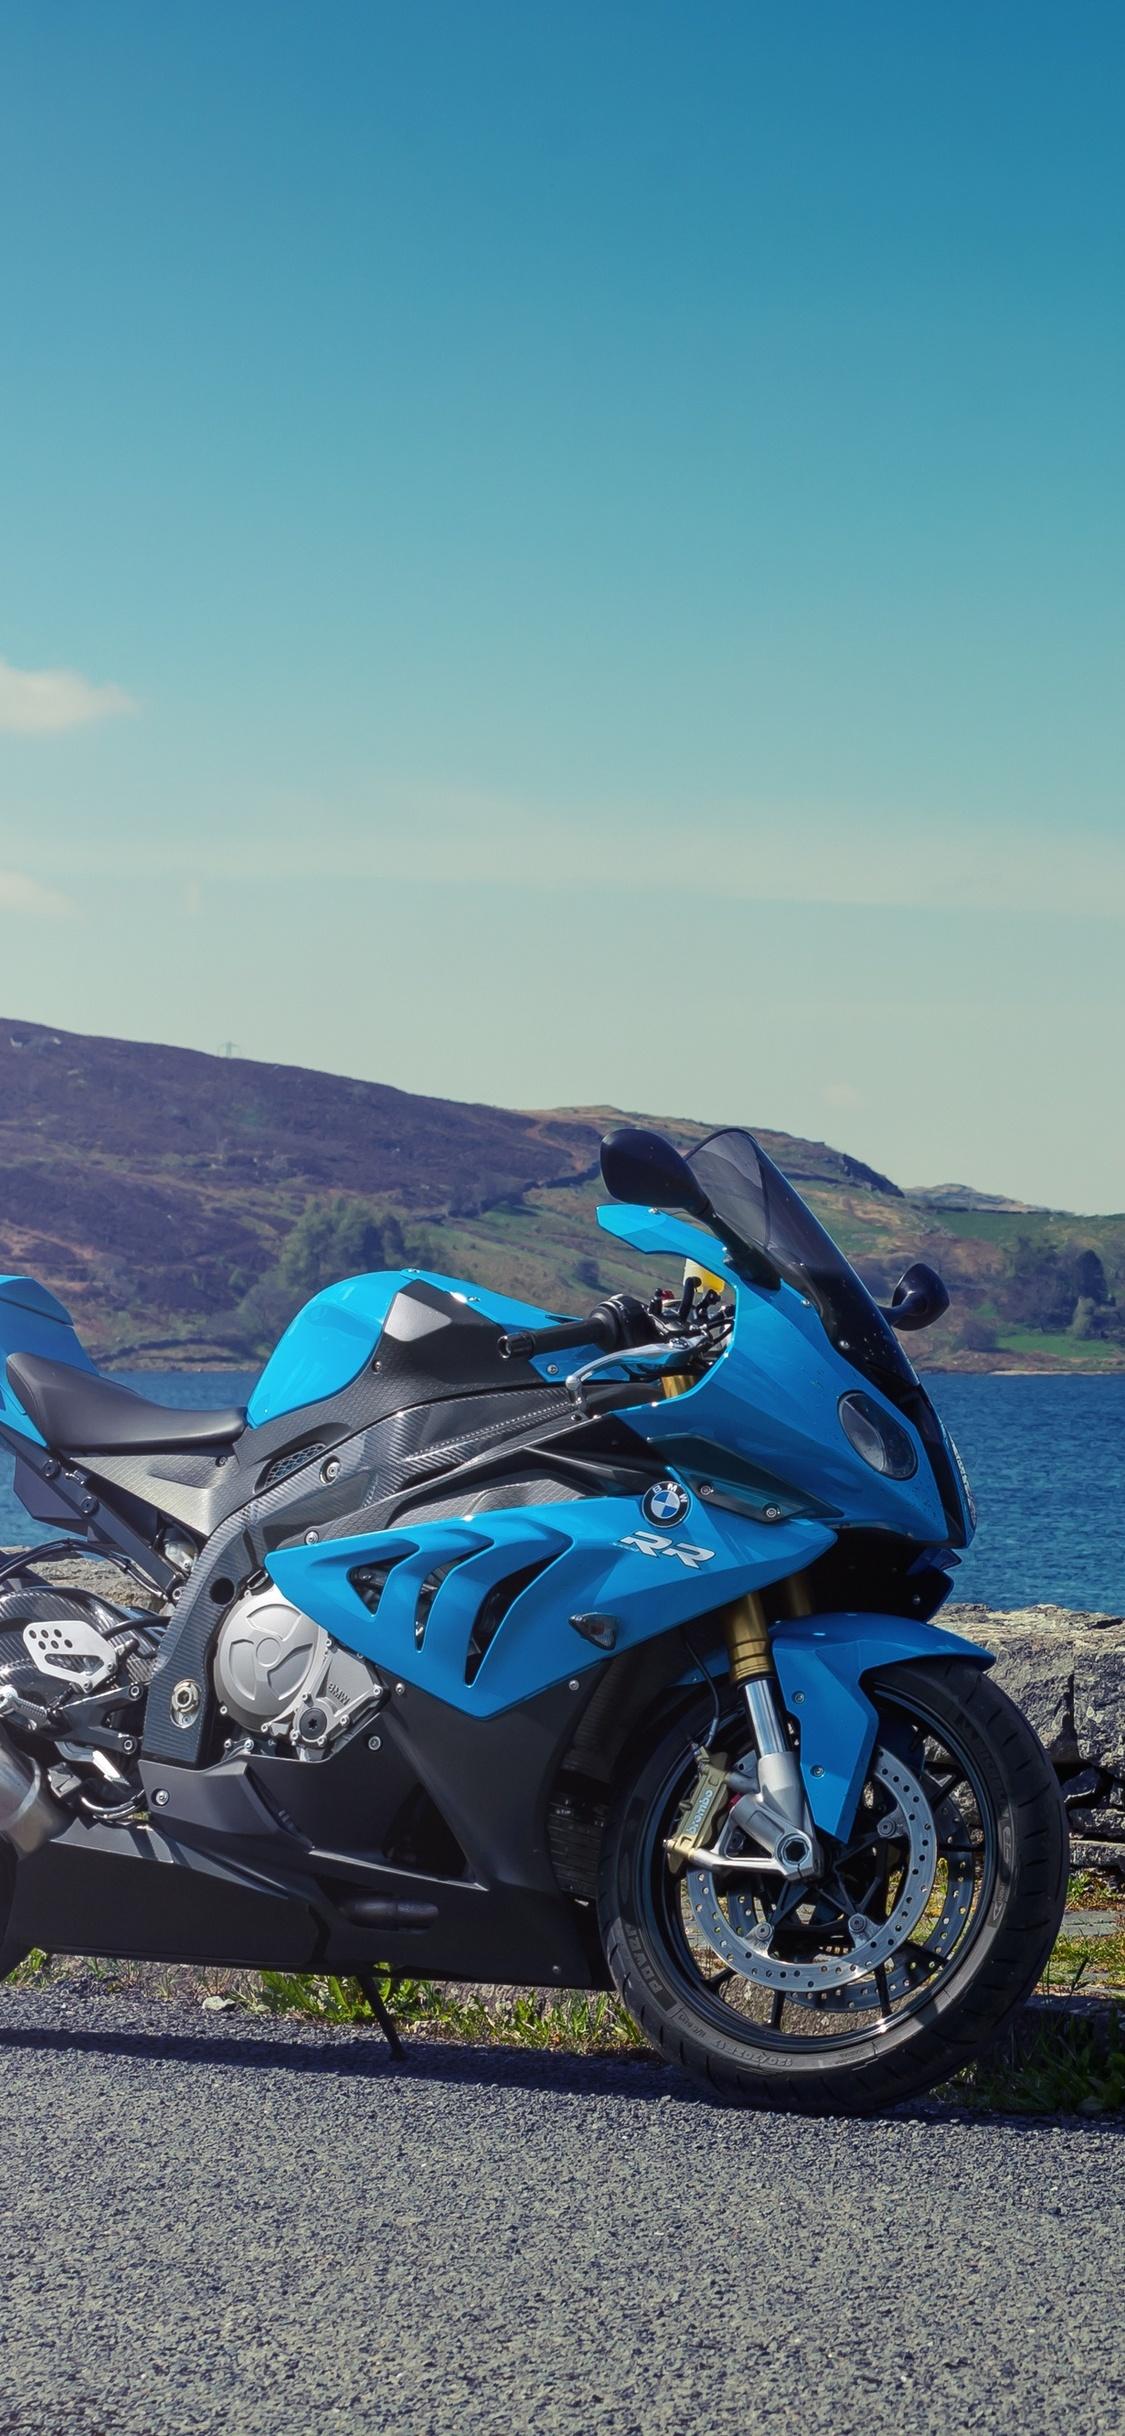 BMW S1000RR 2019 Wallpapers - Wallpaper Cave